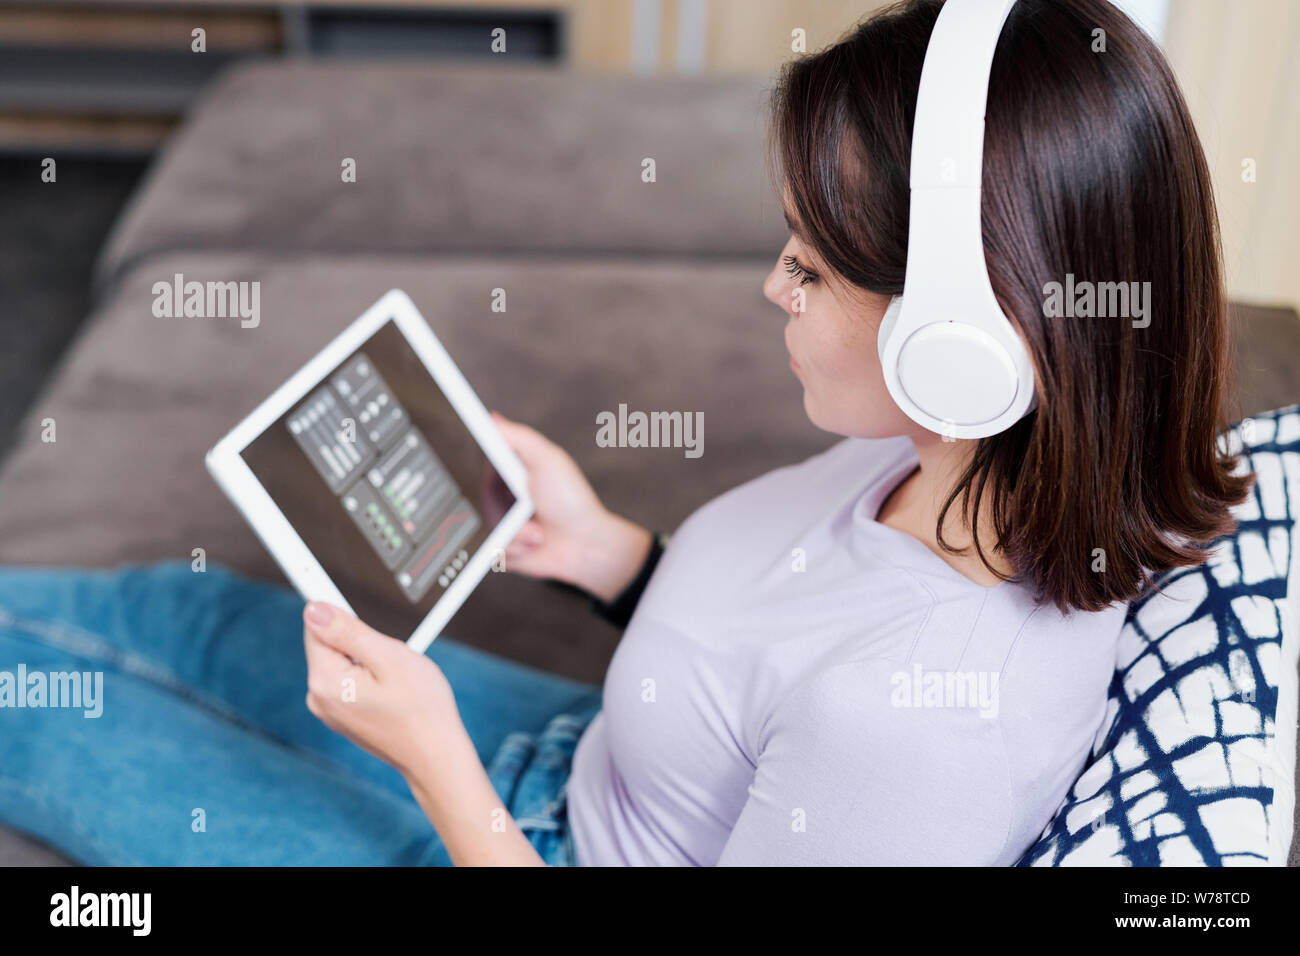 Young woman in headphones looking at remote control panel on display of touchpad Stock Photo